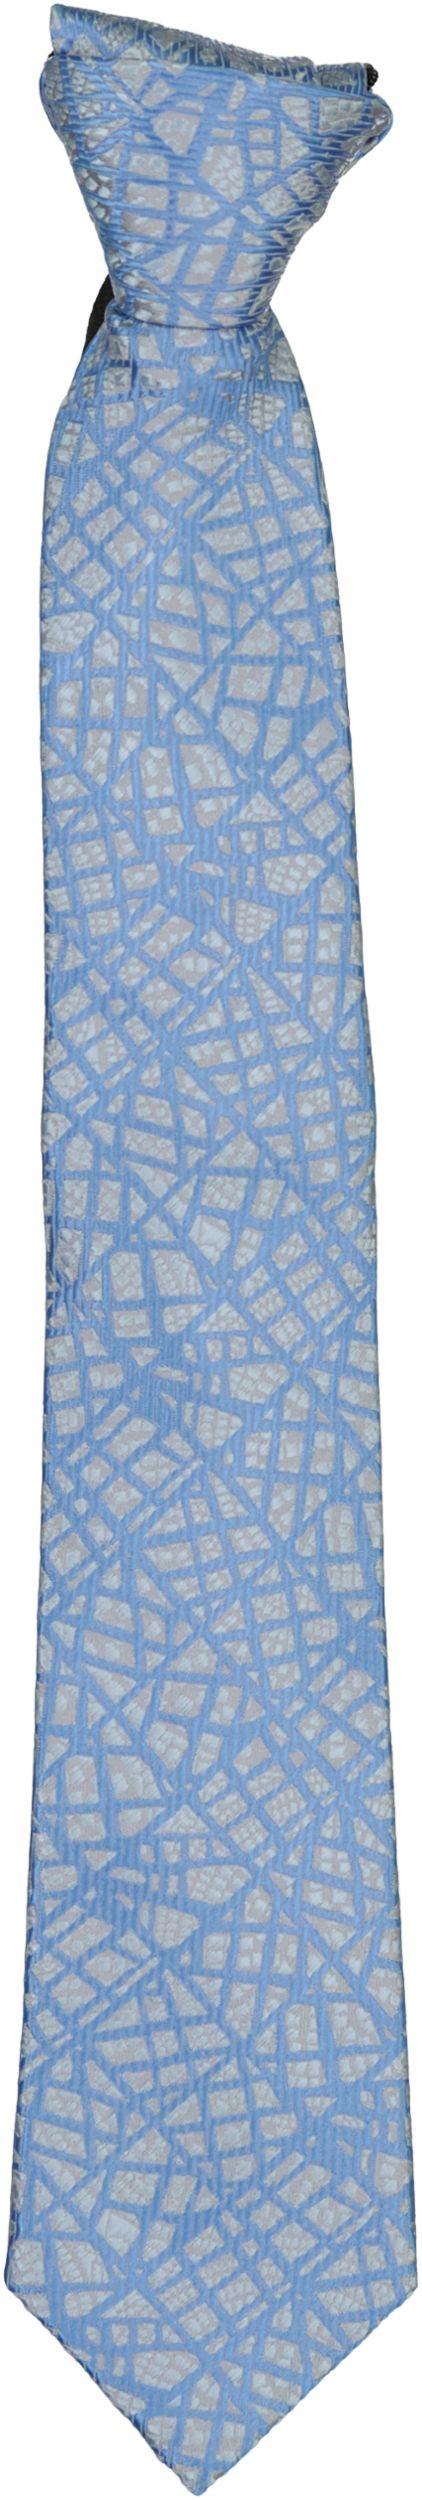 T.O. Collection Mens Necktie - TO260